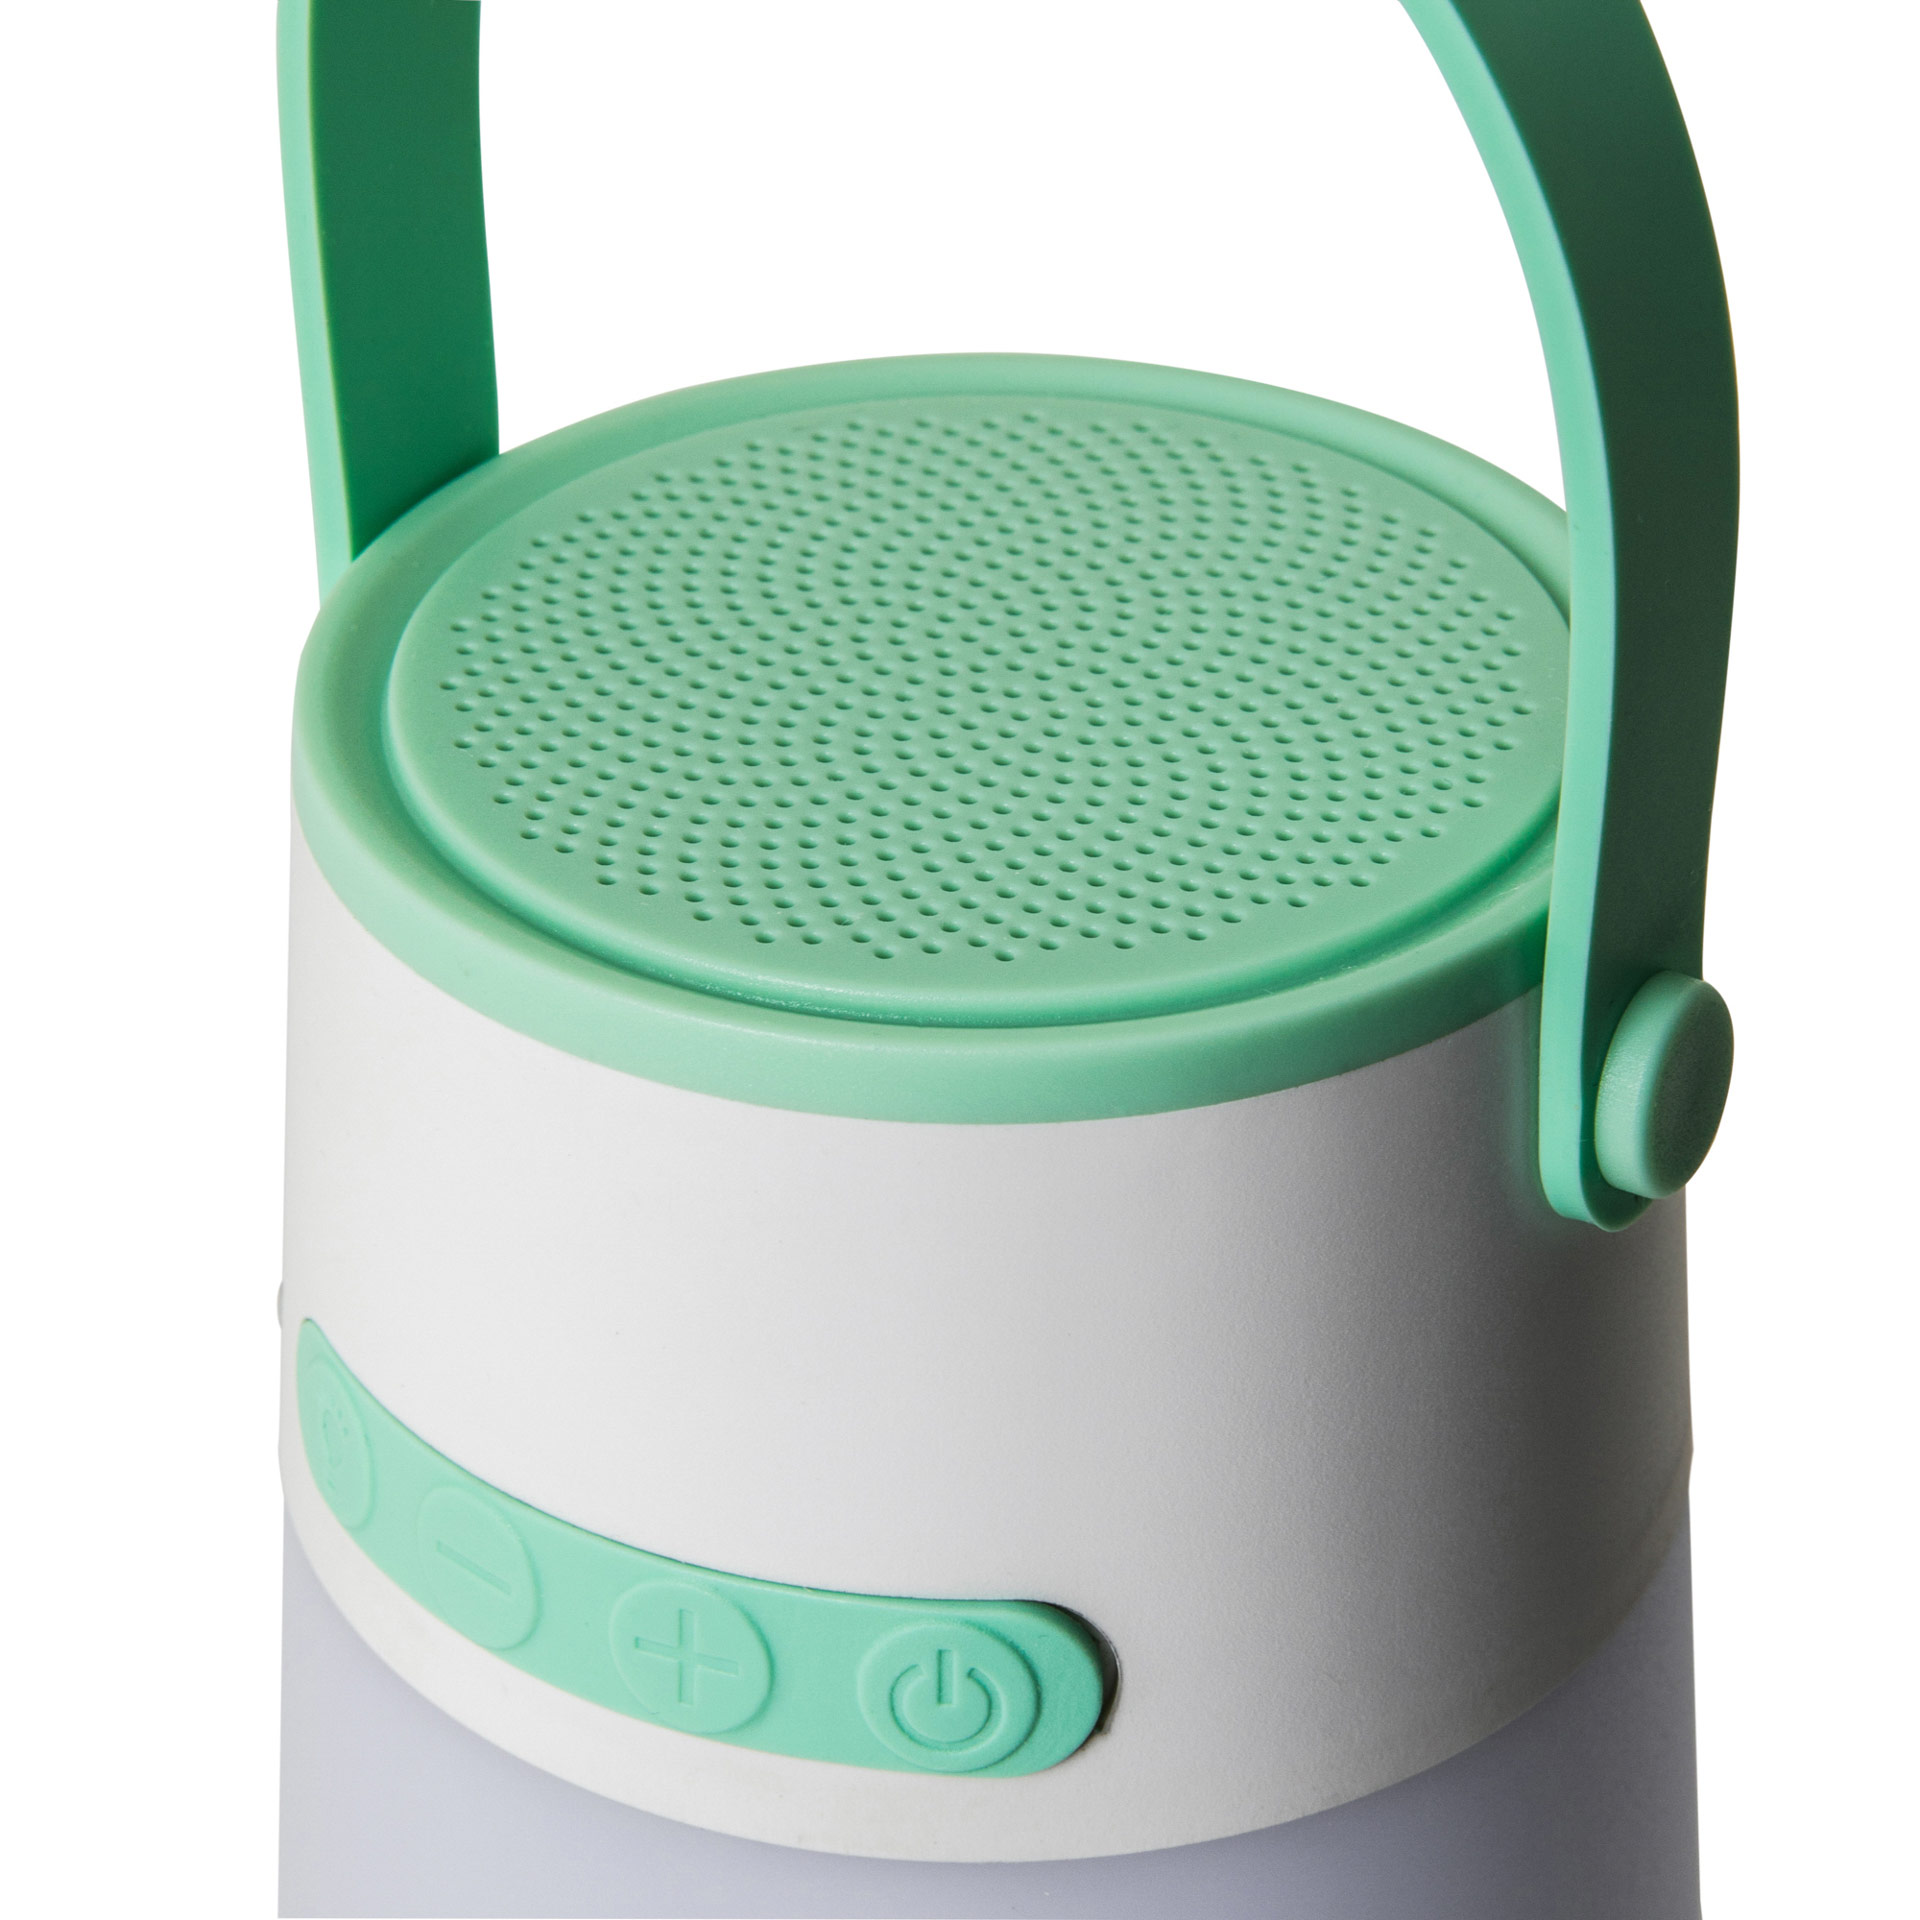 Speaker bluetooth con luce cambia colore, , large